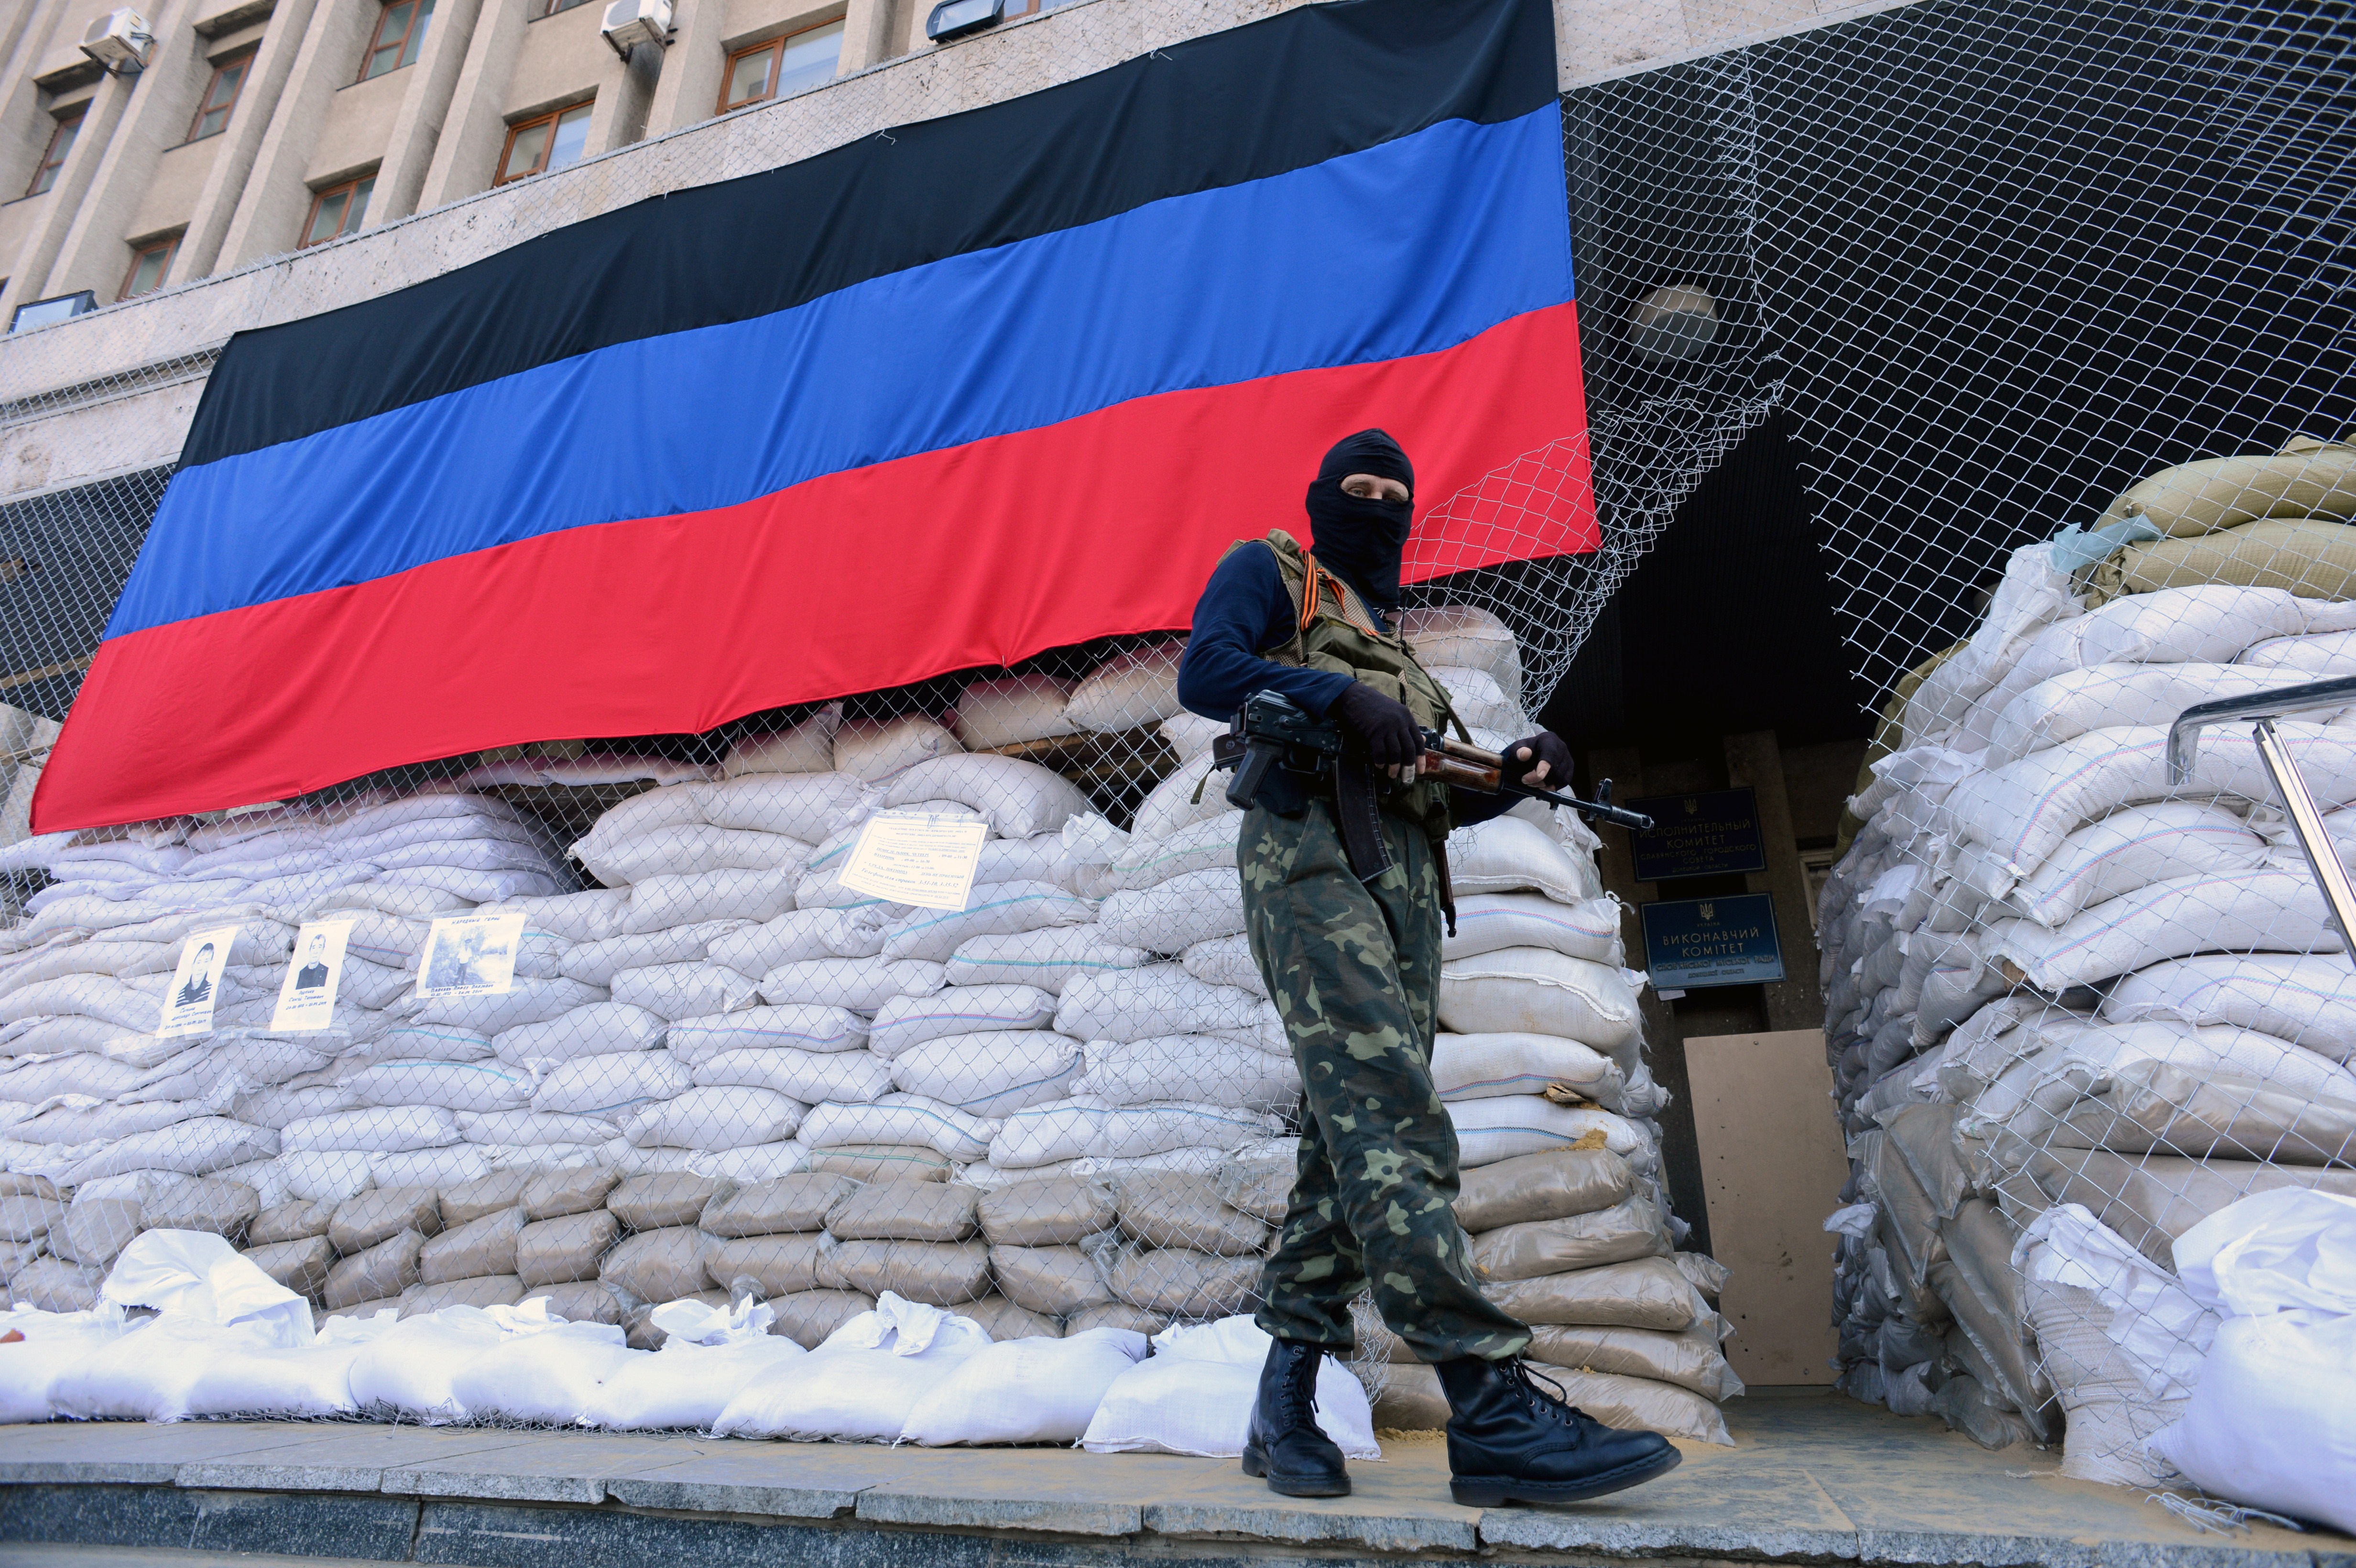 Russia's foreign minister vows response if citizens attacked in Ukraine ...